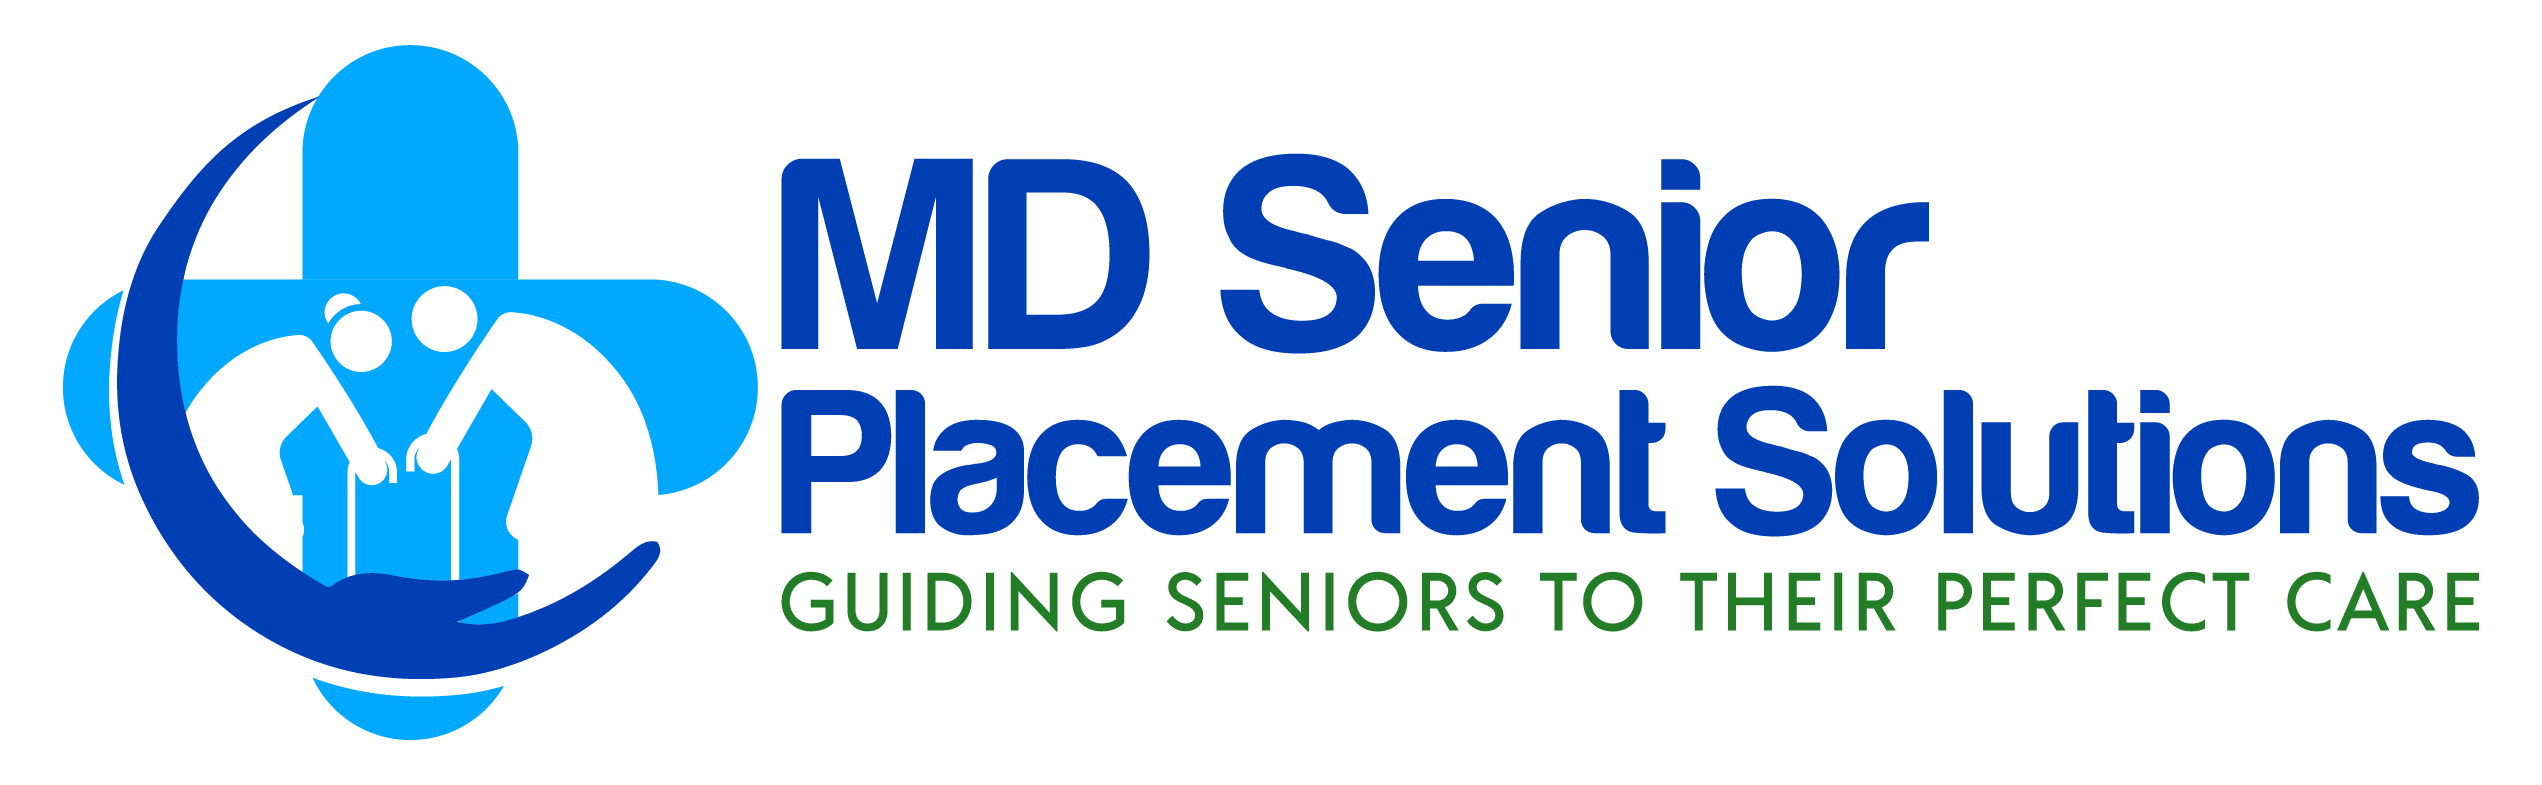 MD Senior Placement Solutions